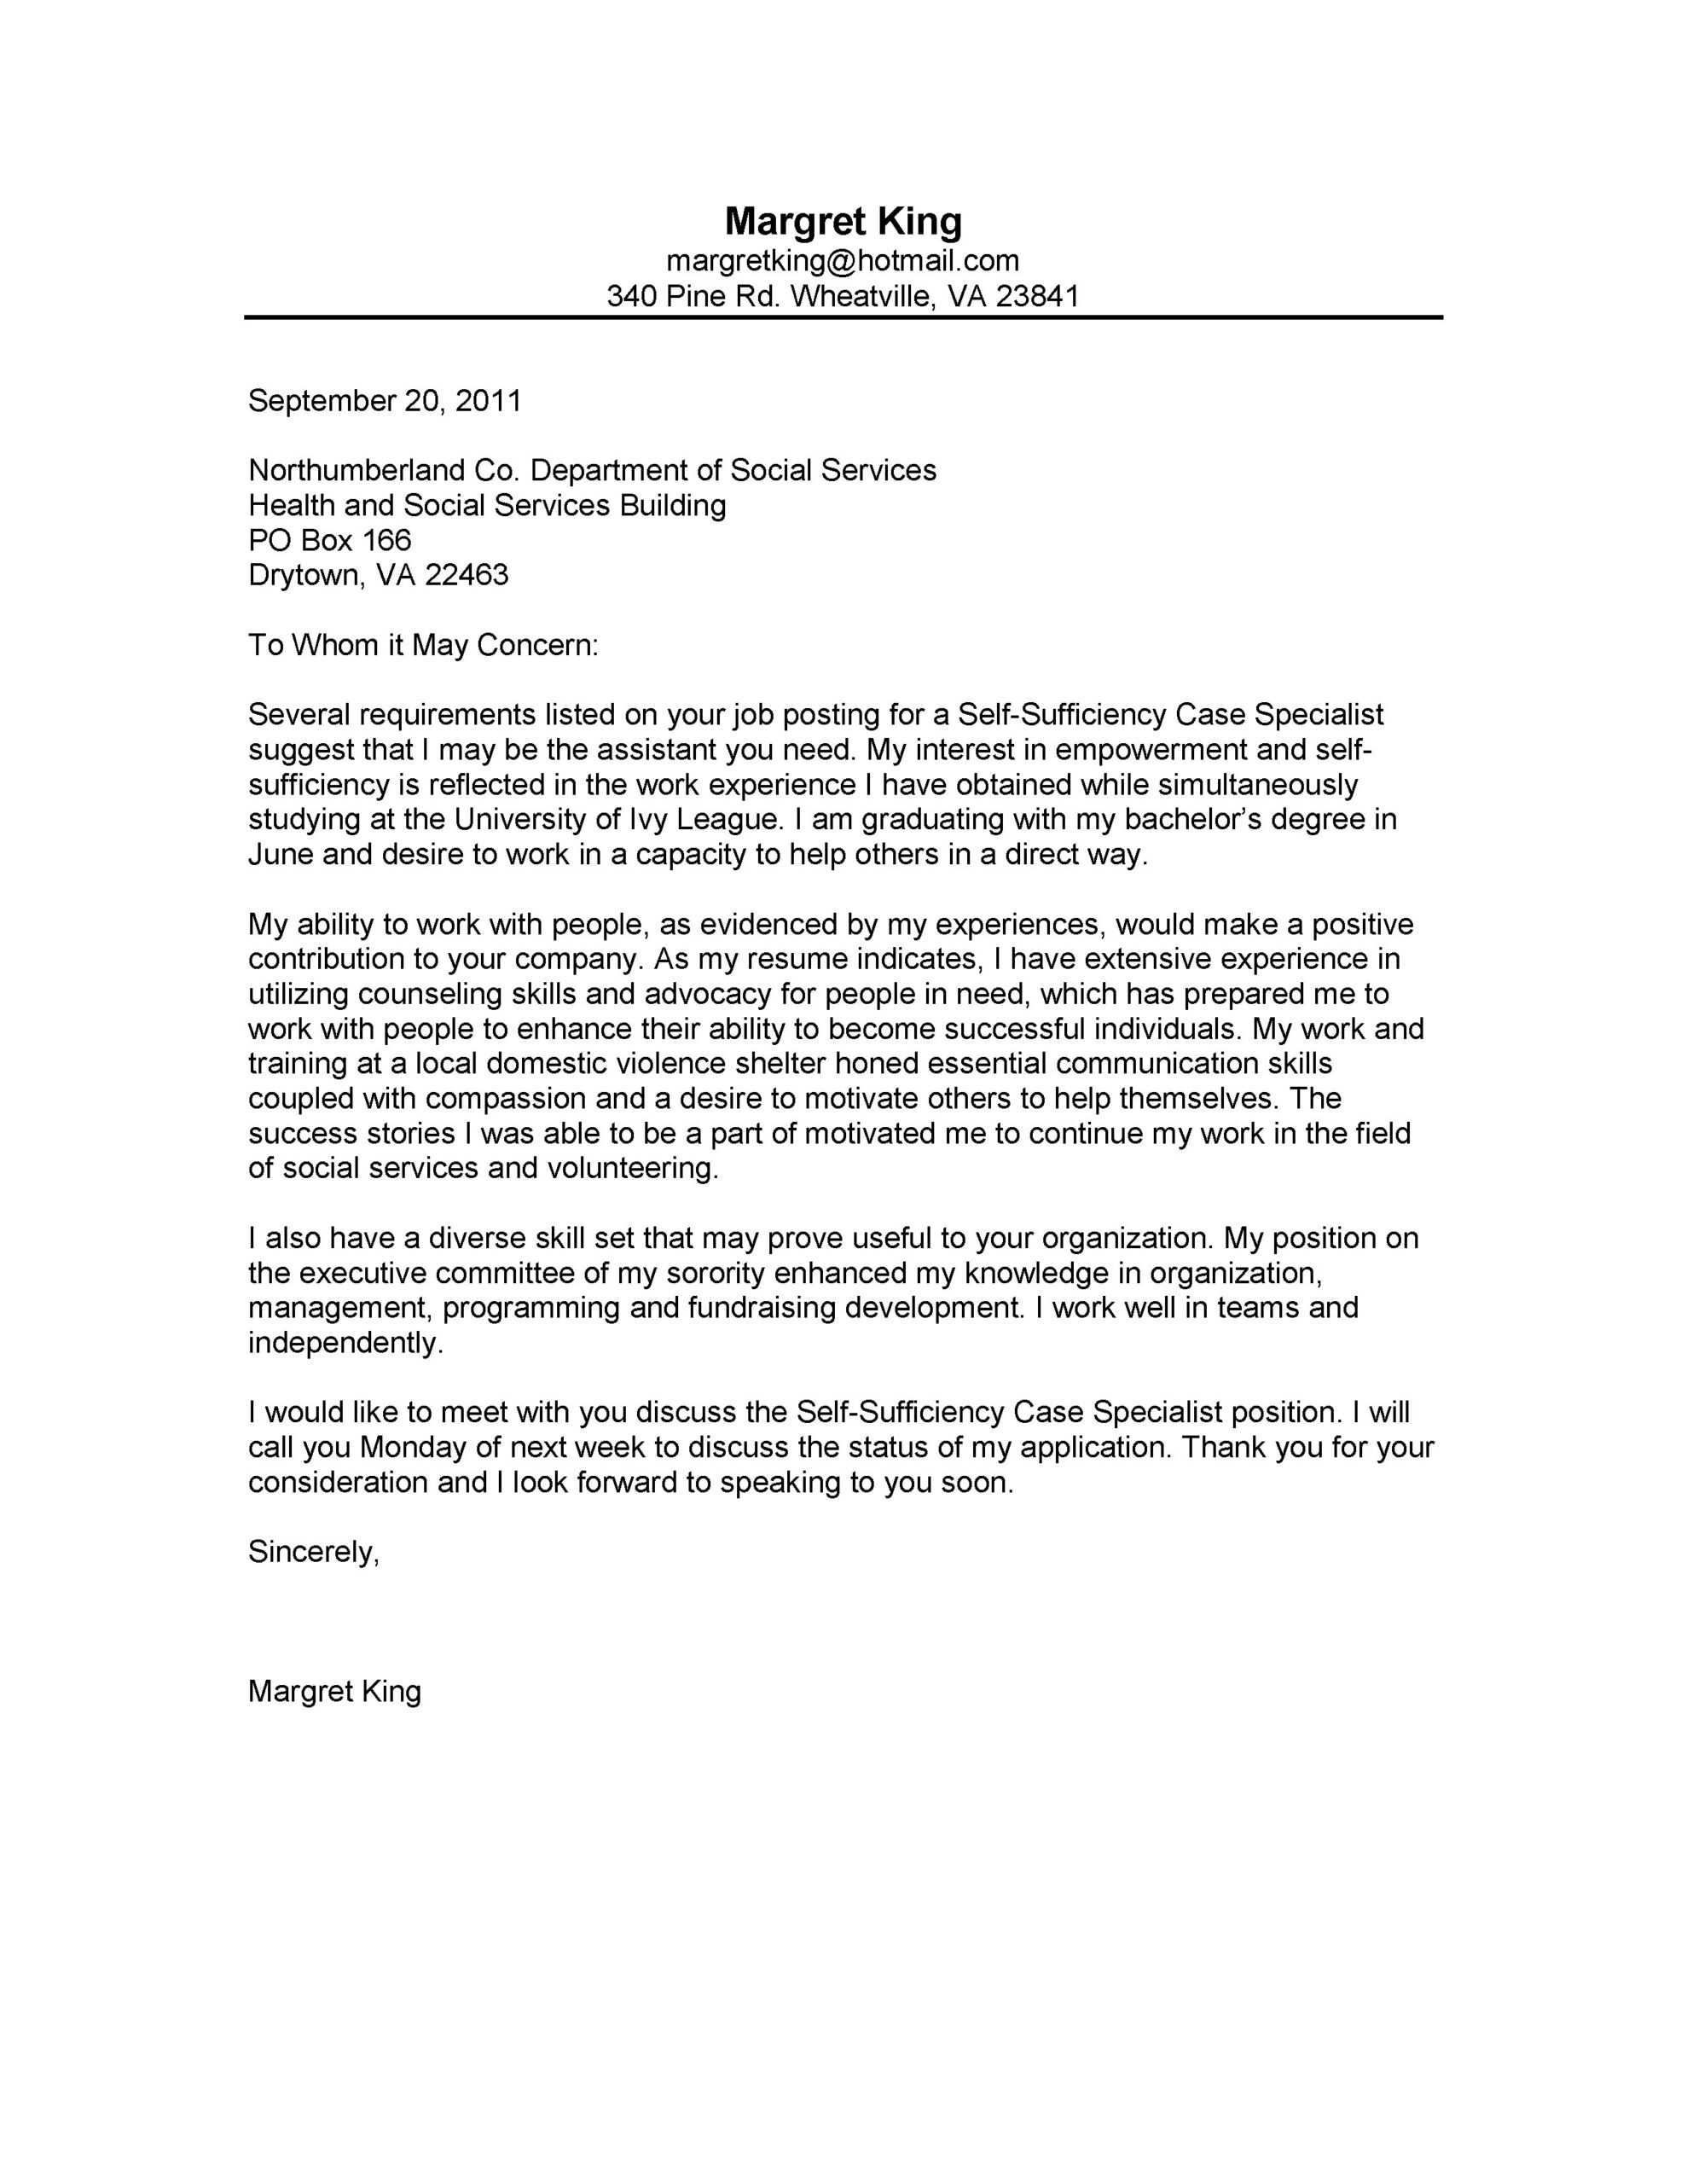 9 Community Service Cover Letter | Payment Format Within Community Service Template Word